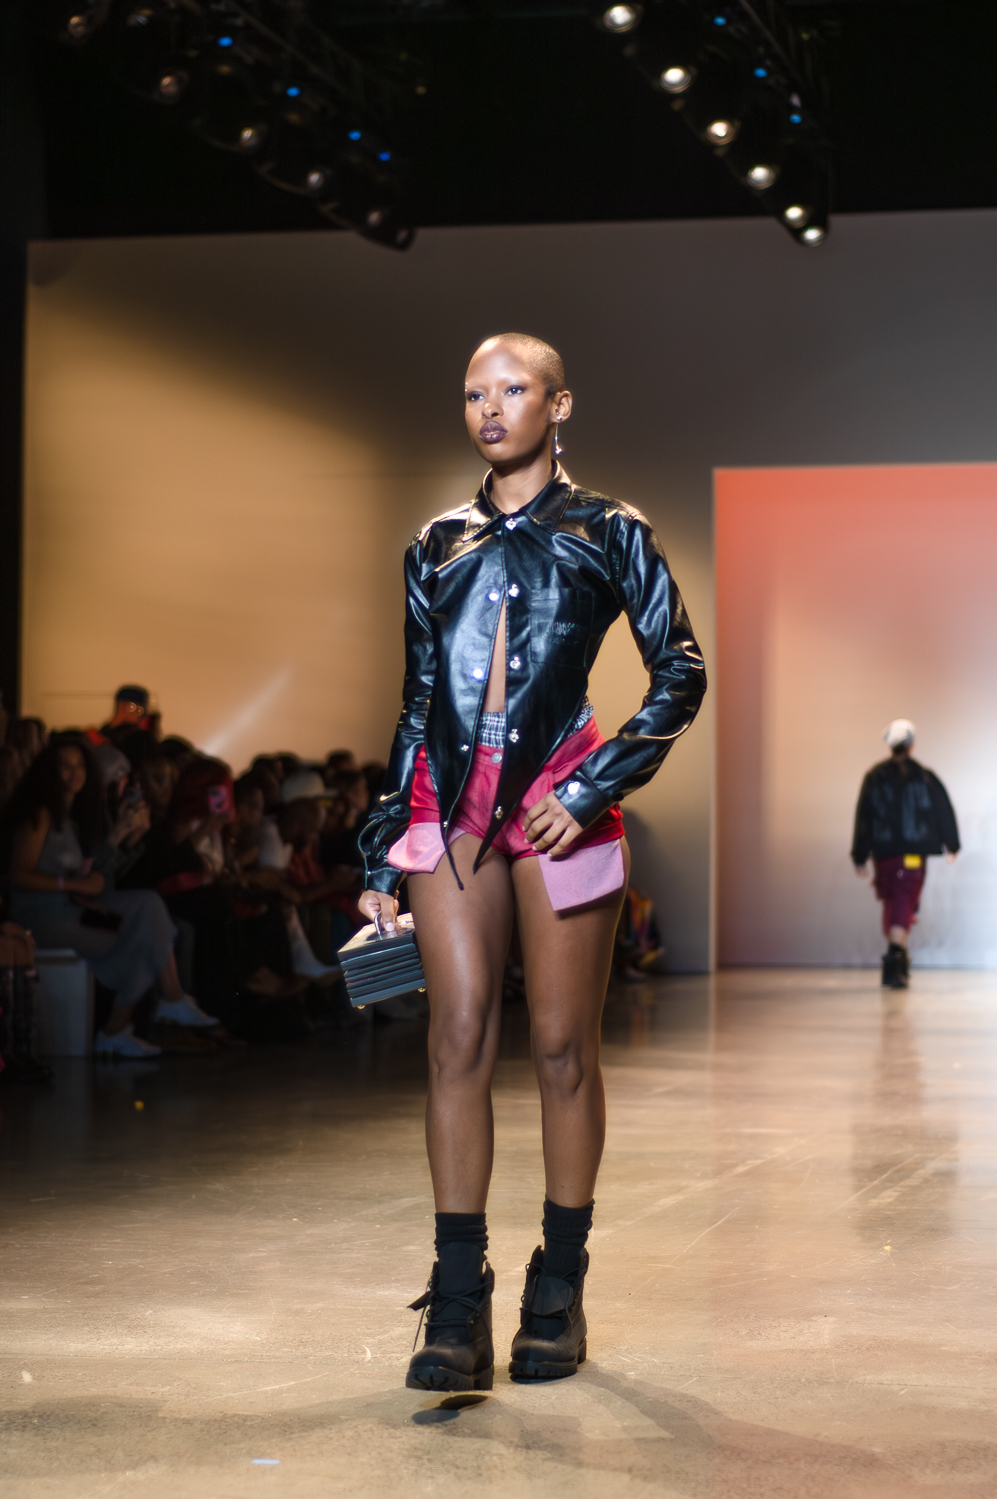 A model wearing a black, leather-like button-up jacket with only the top button closed walks on a runway. The model is wearing short pink shorts, and the model’s boxers are slightly visible above the shorts. The model is wearing black socks and black lace-up boots, and holds a rectangular case by the handle on top.